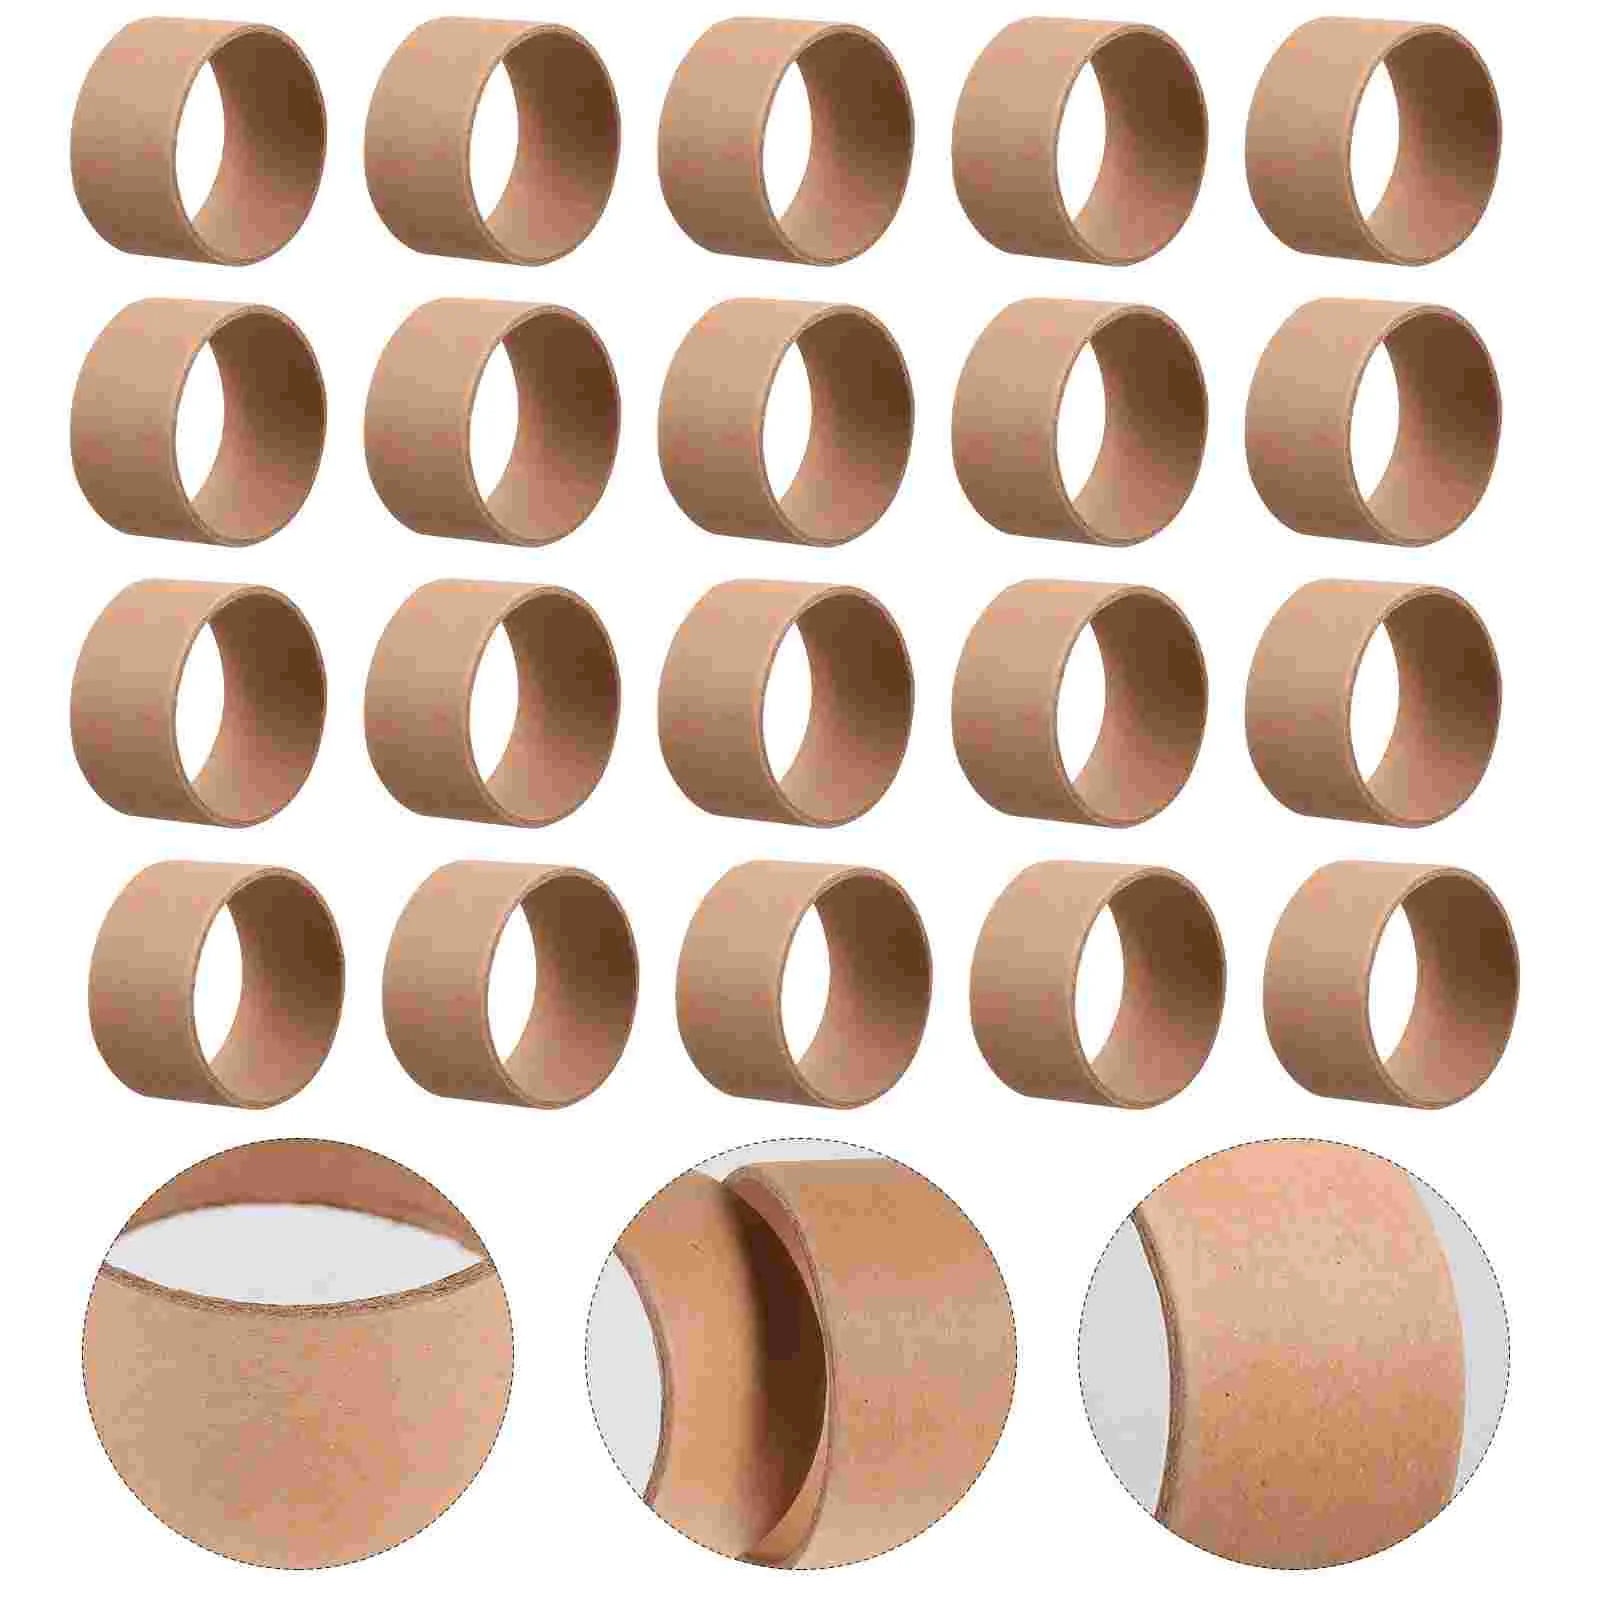 Paper Cardboard Roll Crafts Toilet Tubes Tubes Craftroll Kraft Round Towel Brown Crafts Diy Art Tube Empty Small Thin Blank